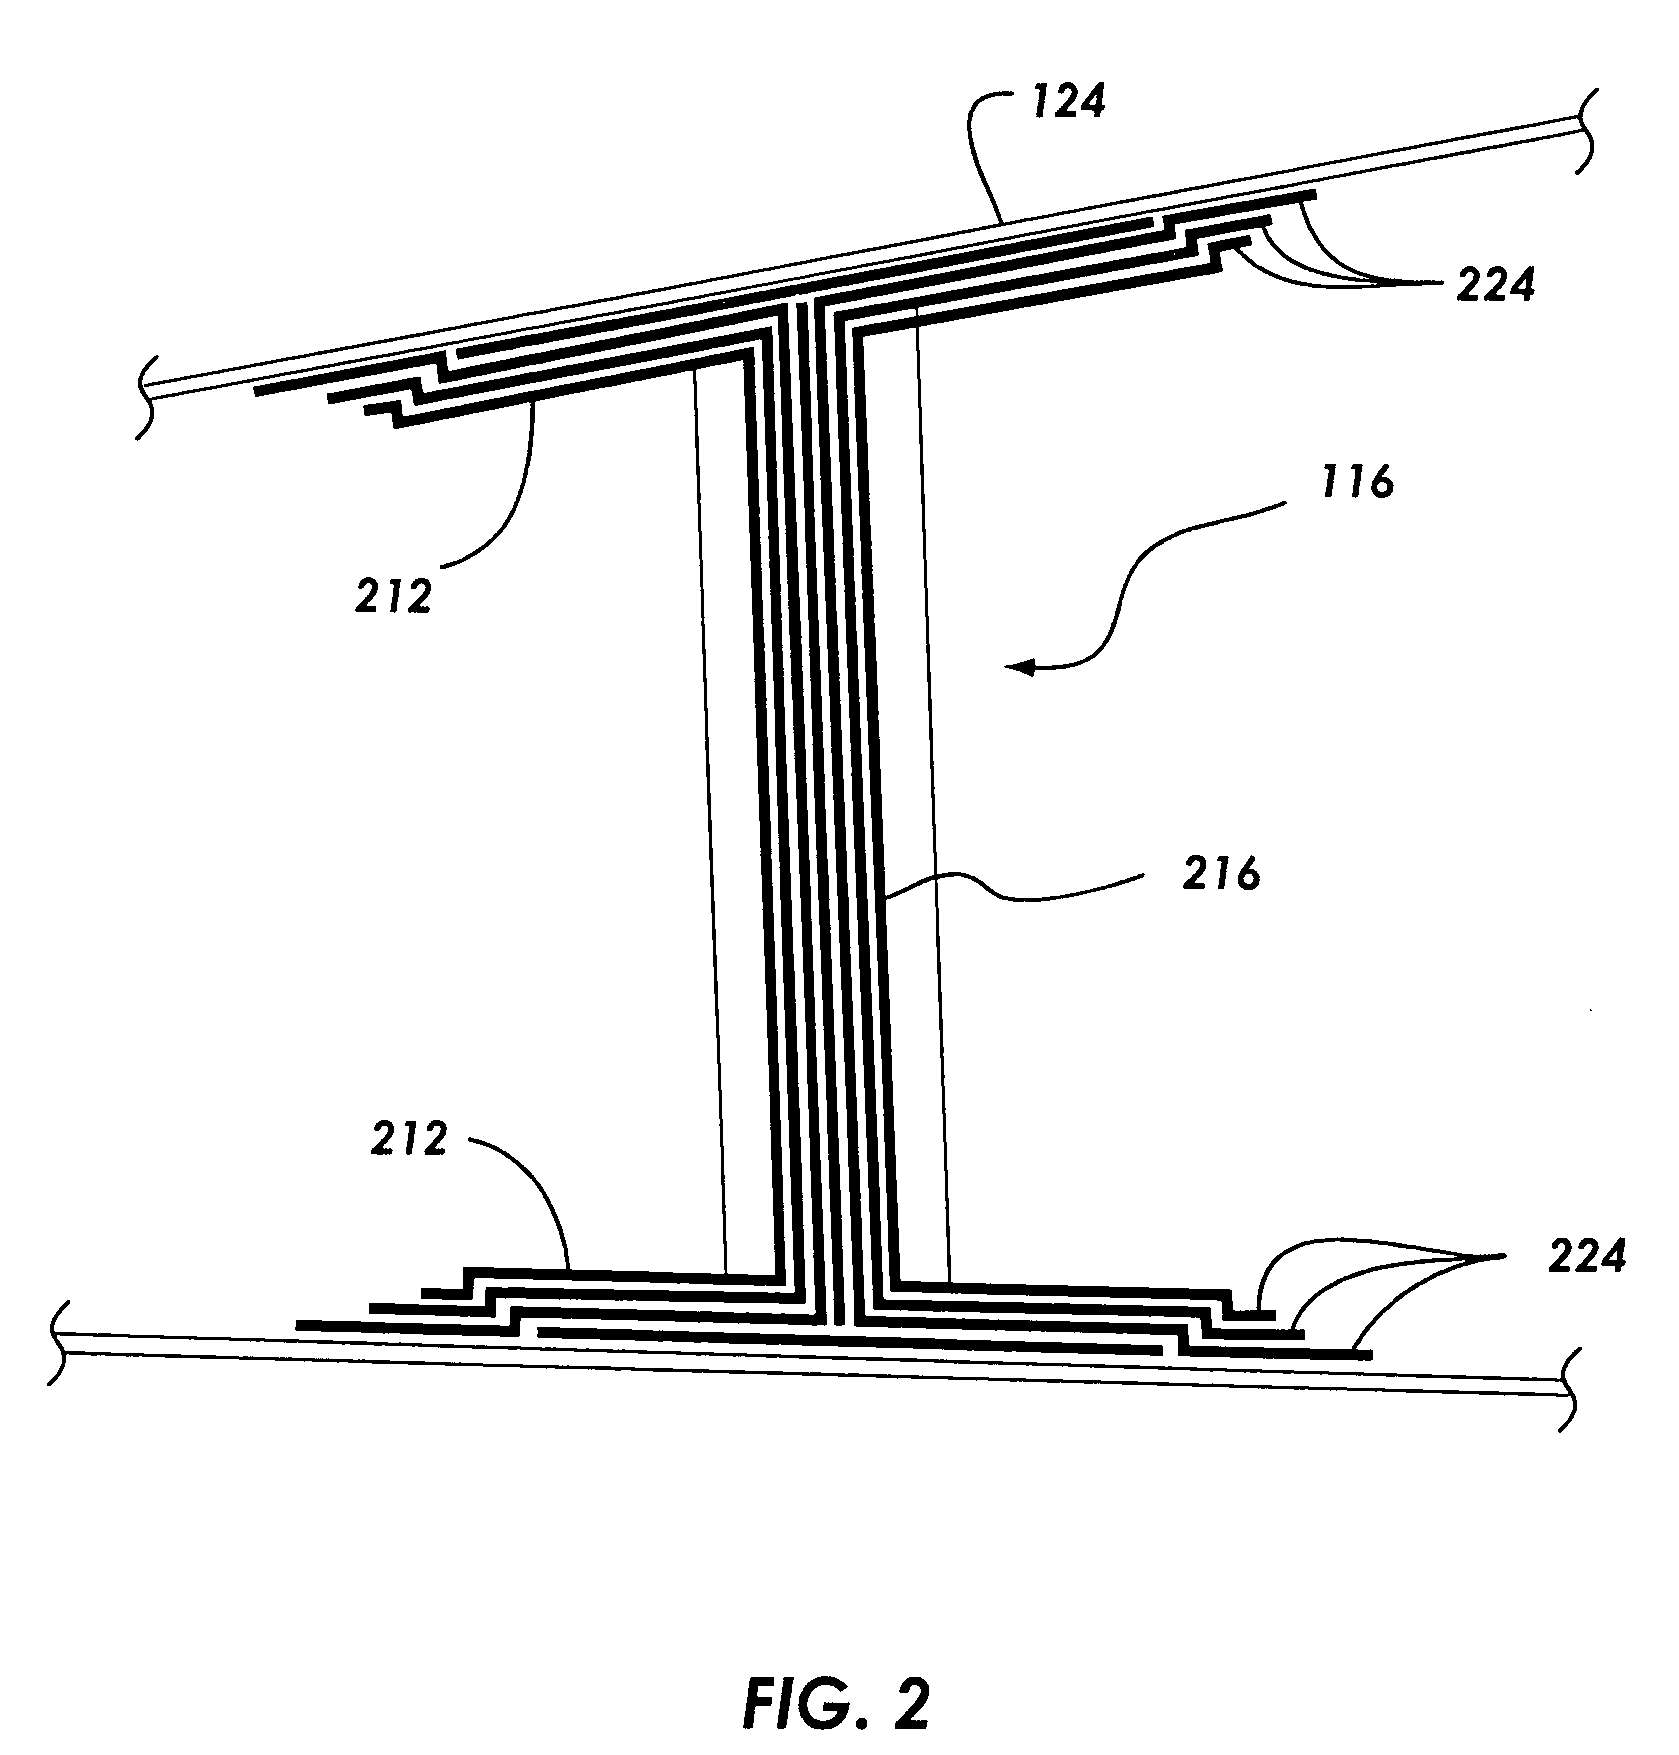 Process for forming a single piece co-cure composite wing